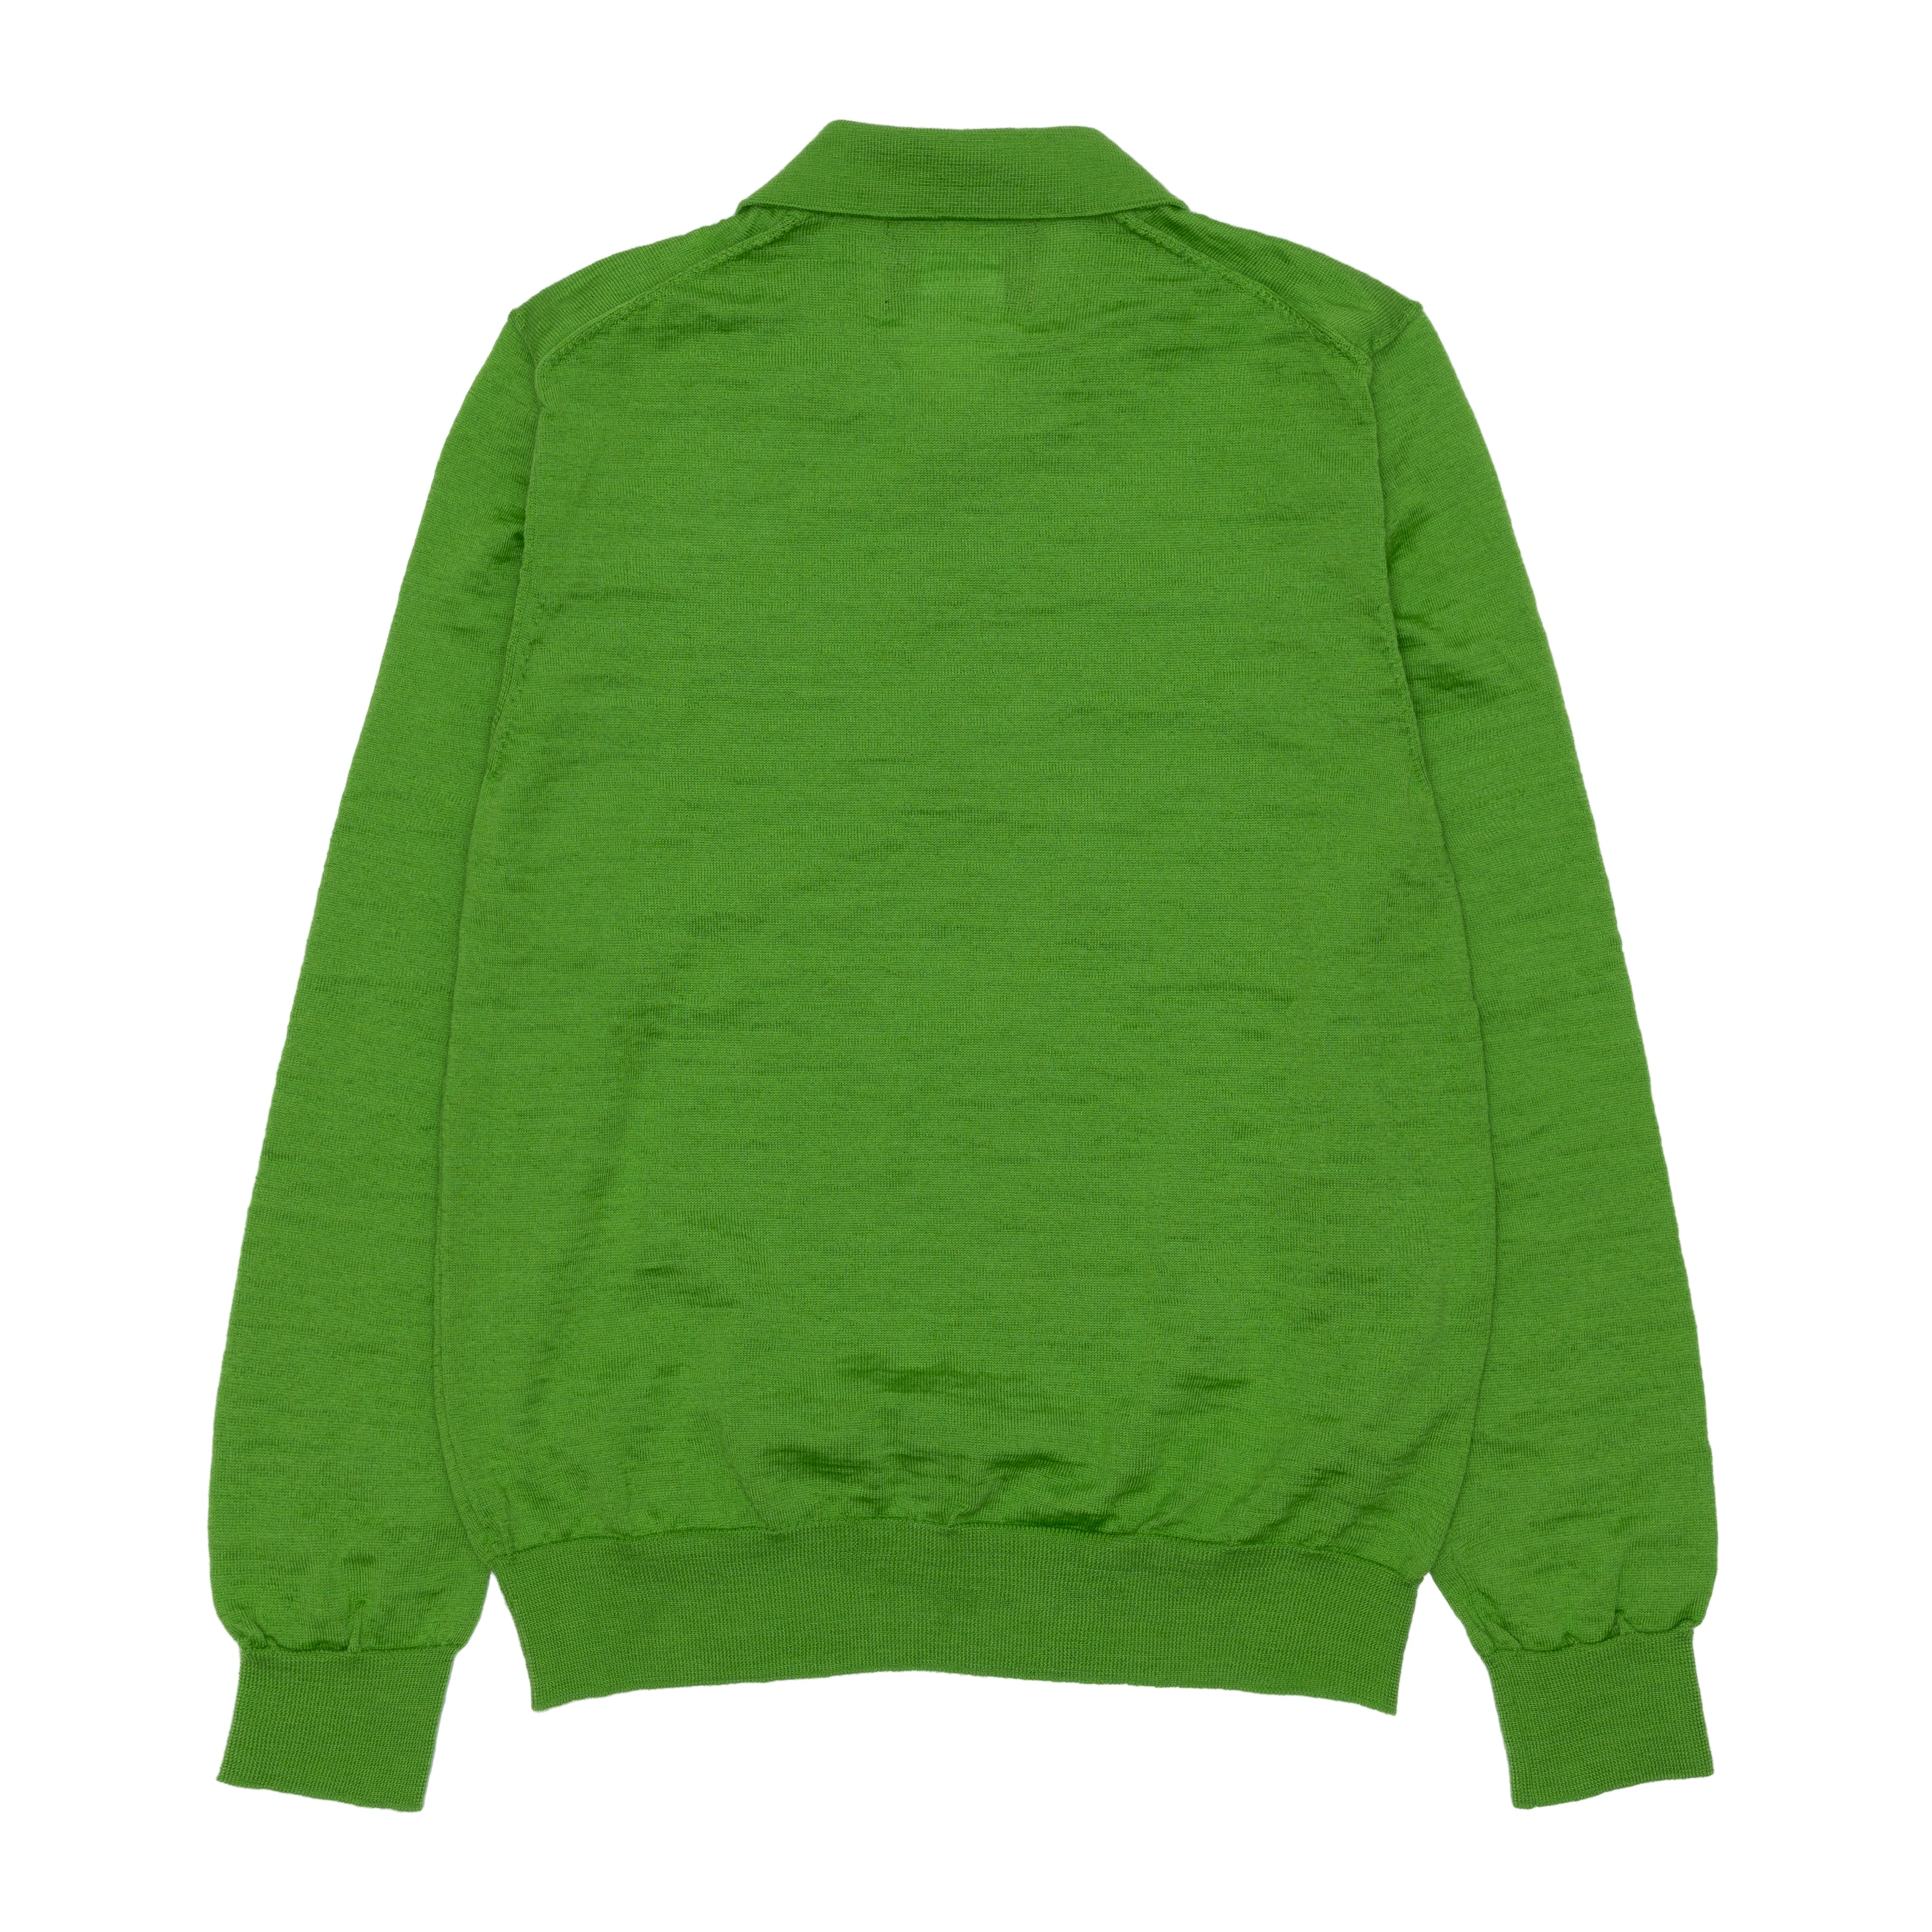 THE BEATLES CDG - One Point Knit Polo - (Green)